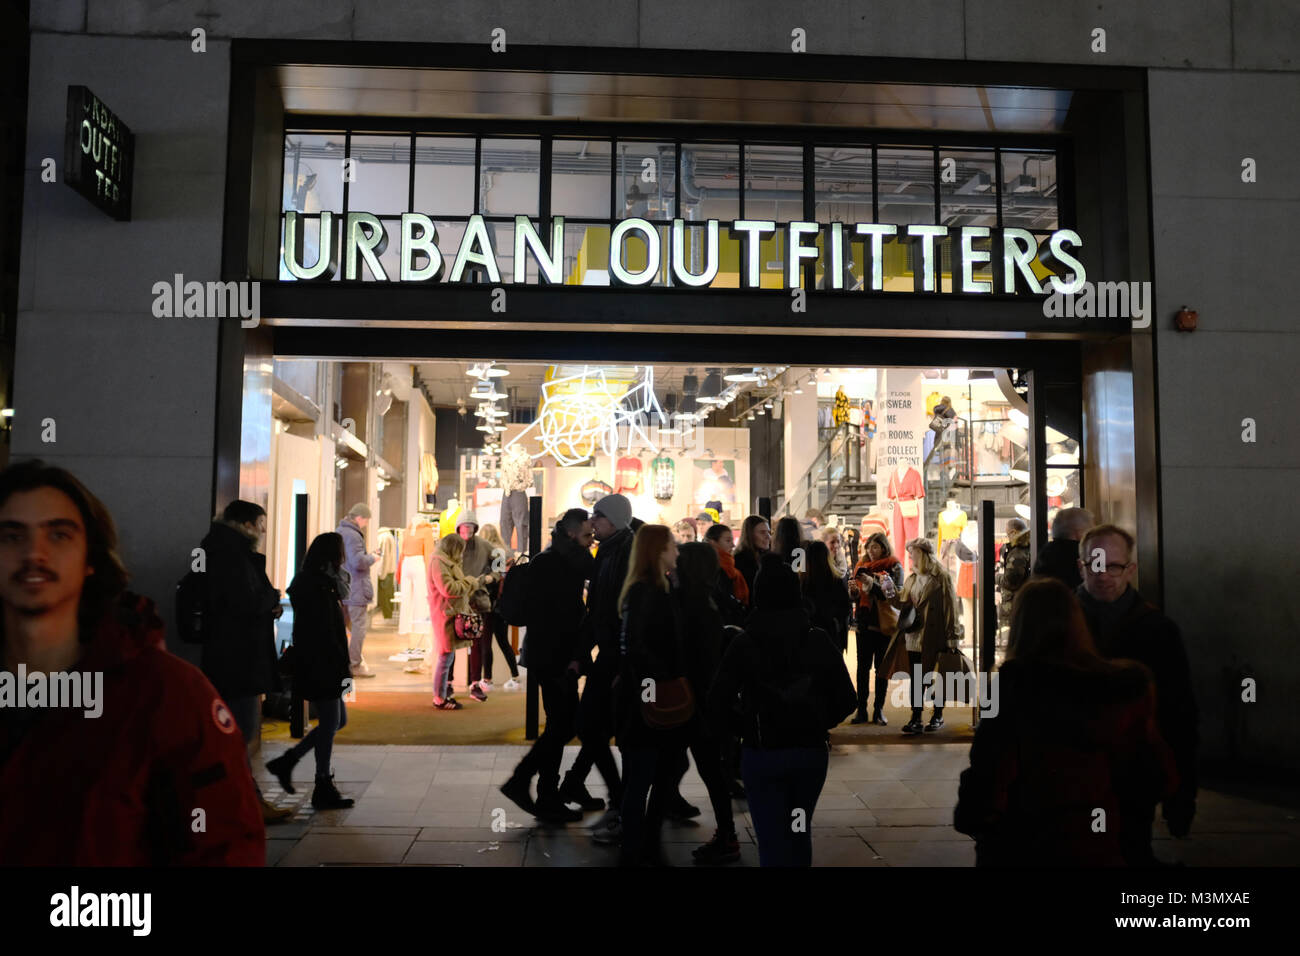 Urban Outfitters clothing store on Oxford Street, London, England, UK ...